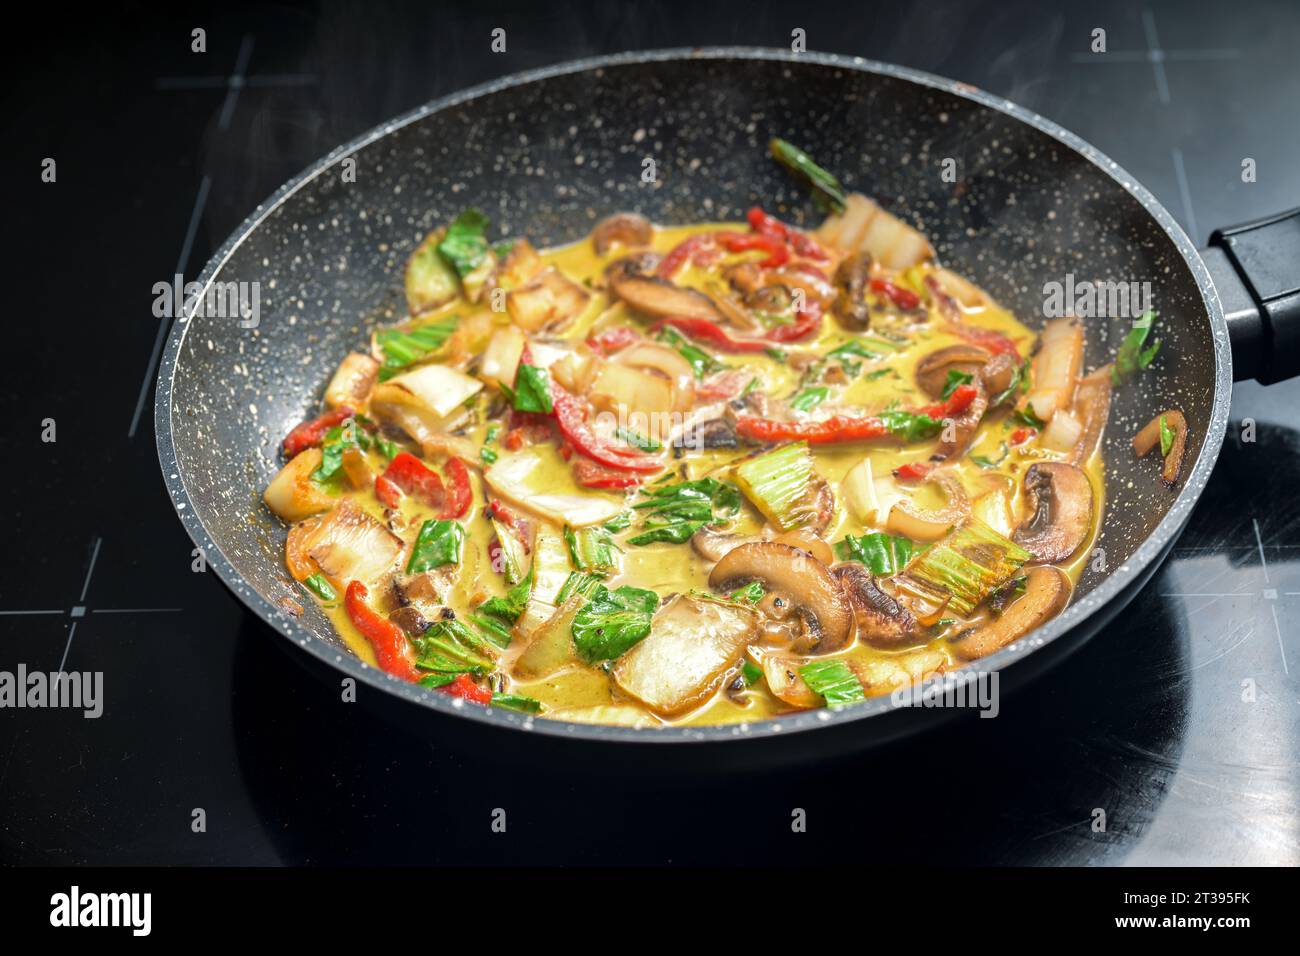 Vegetable Thai curry in a frying pan, ingredients like red bell pepper, mushroom, pak choi, seasoned with ginger, turmeric and onions, cooked in cocon Stock Photo